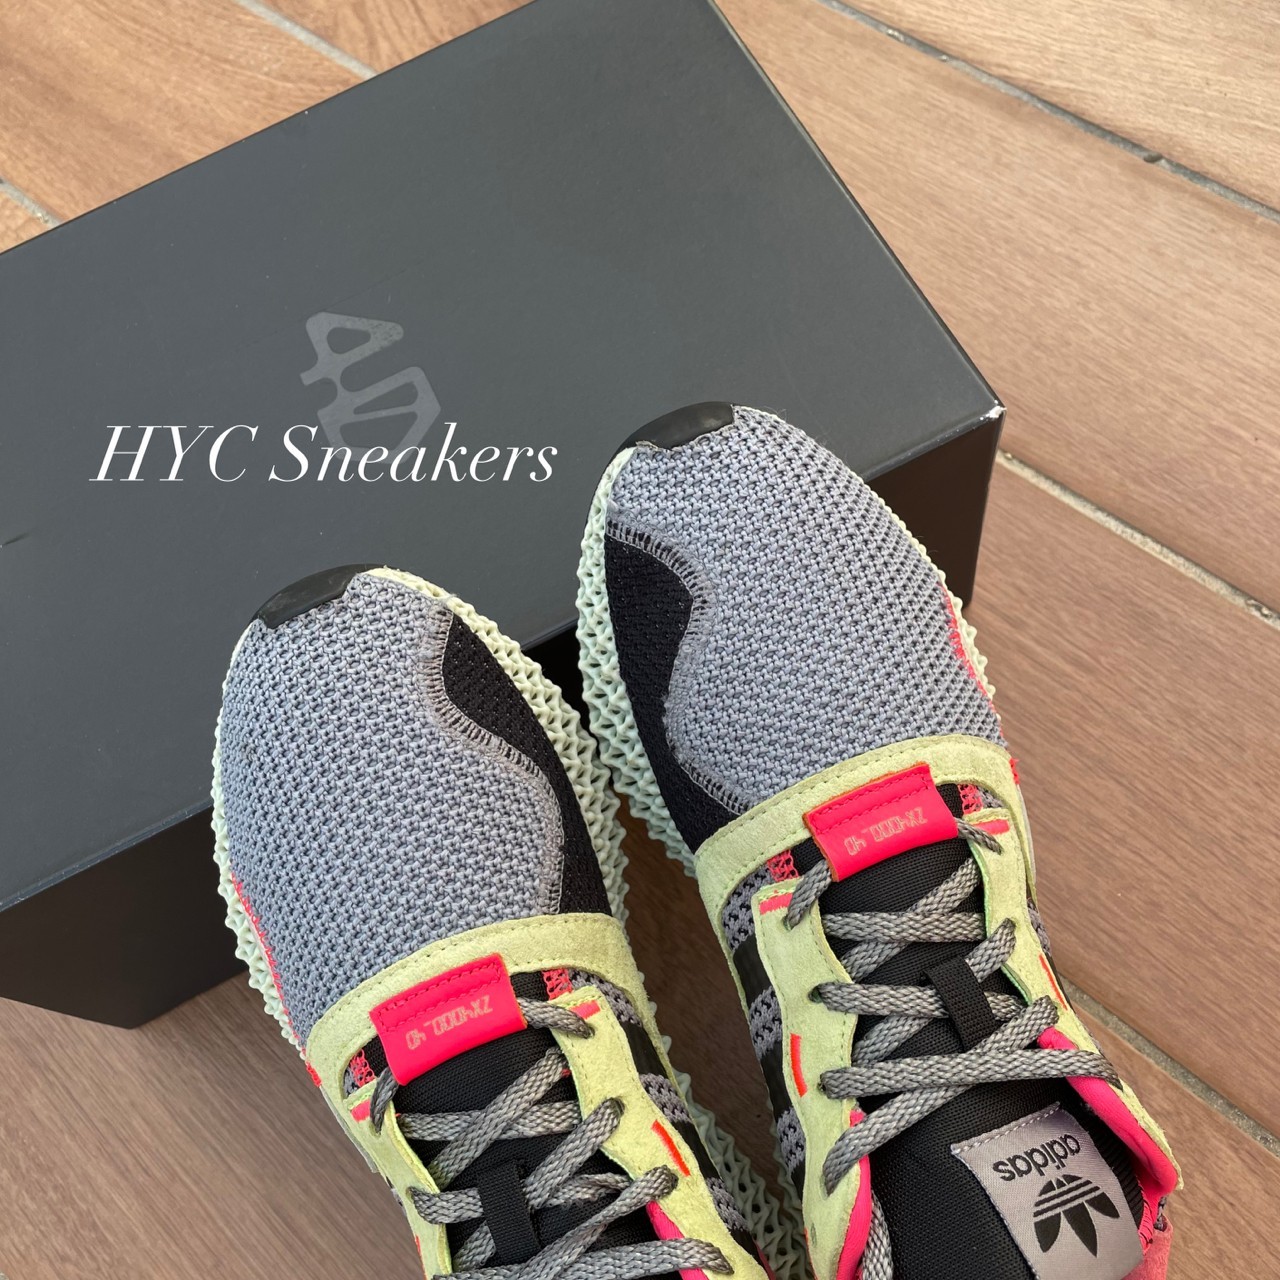 ADIDAS ZX 4000 4D 粉綠US7.5 BD7927 – HYC Sneakers Online Store